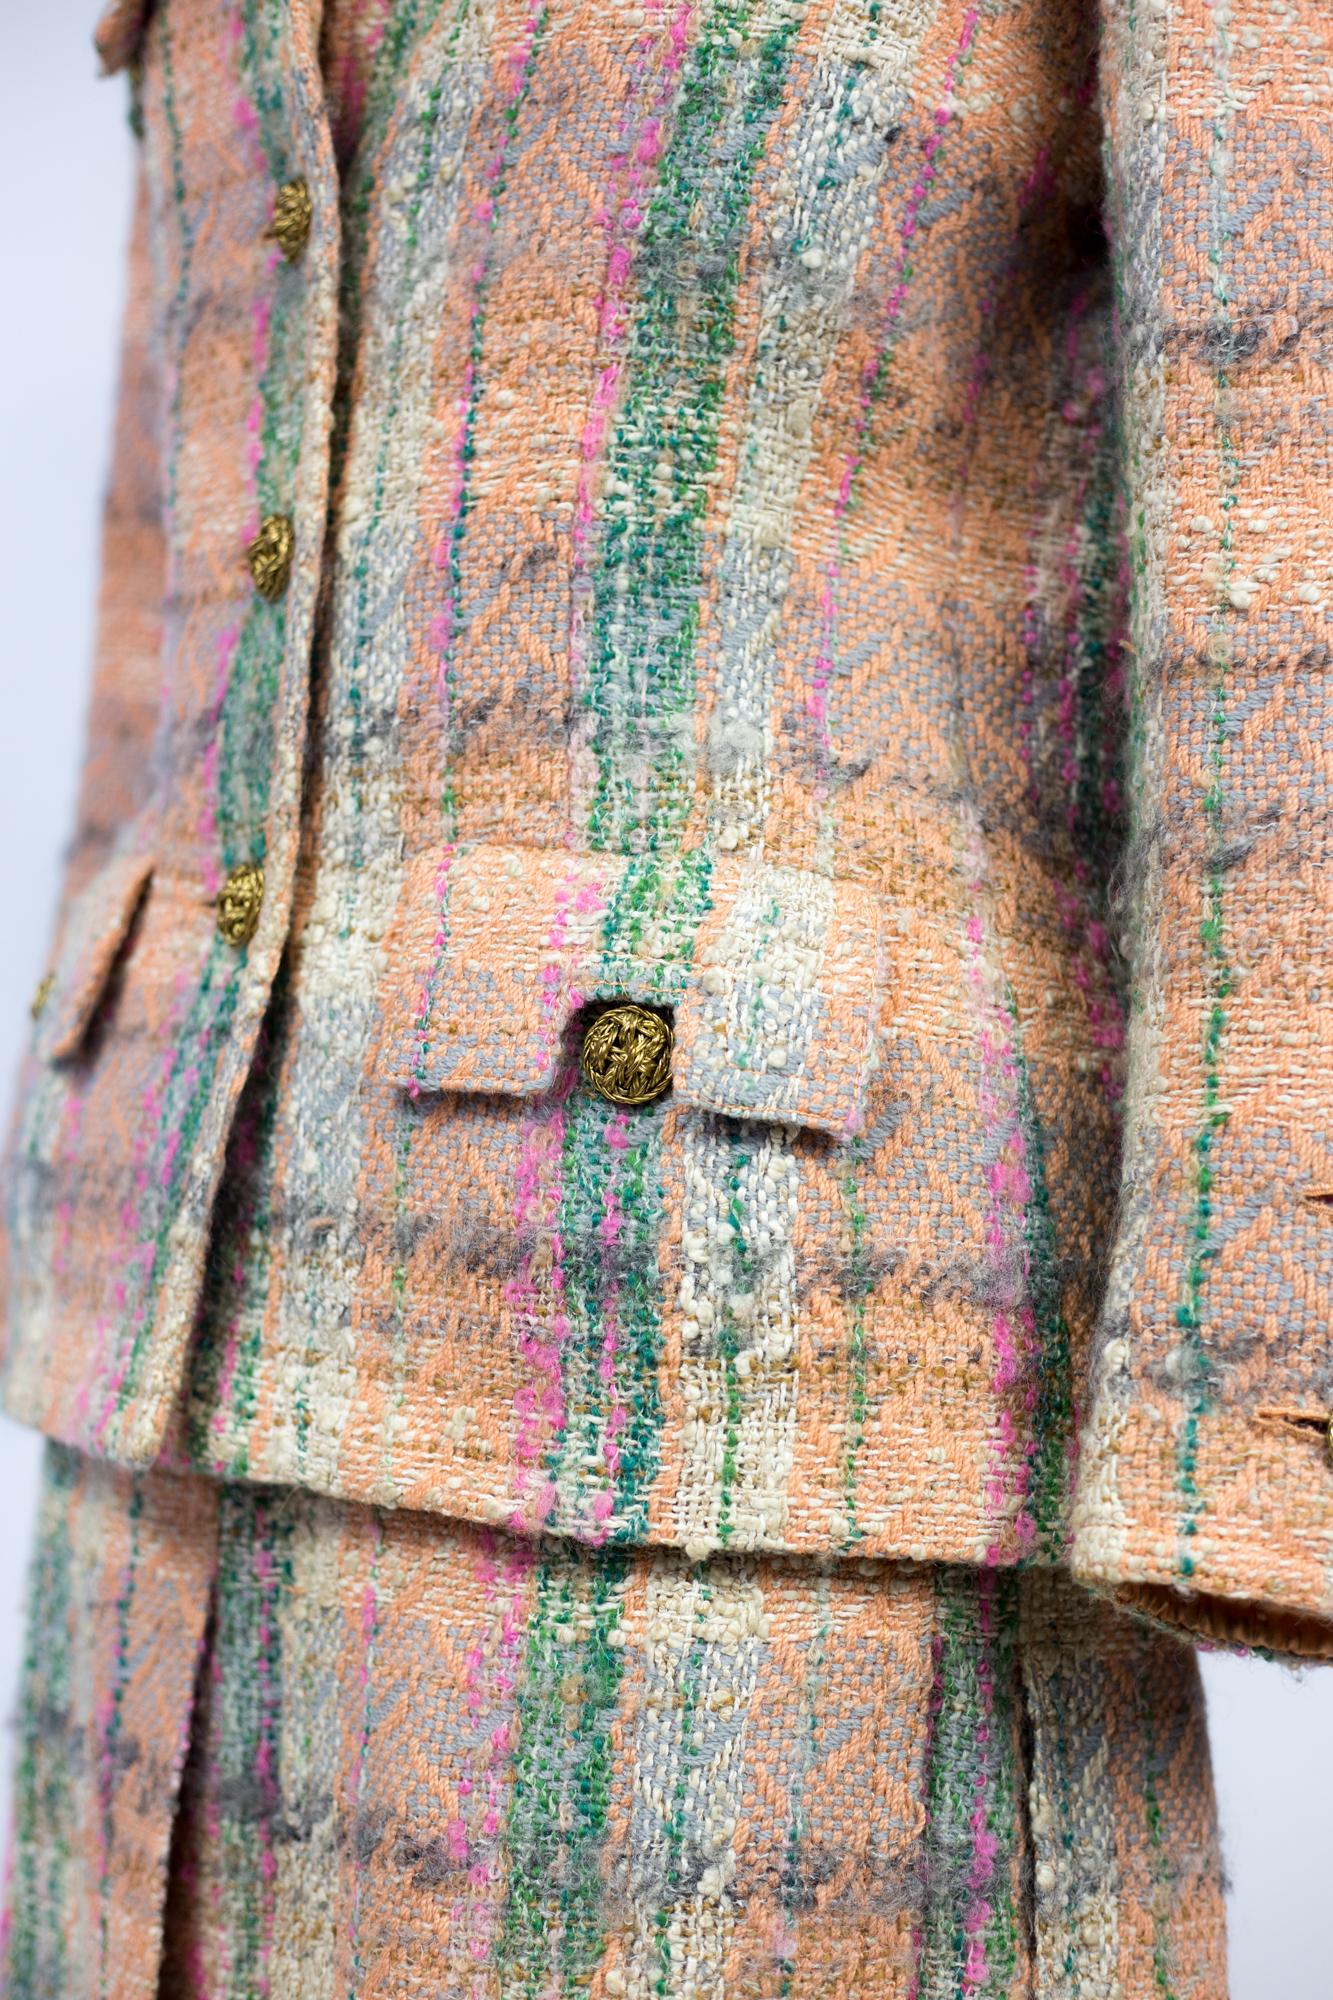 Circa 1970/1975
France


Elegant Gabrielle Chanel Haute Couture skirt suit numbered 48863 dating from the 1970s. Skirt and jacket in wool tweed mottled and curled in green, pink, salmon and cream tones. Straight jacket with four pockets with